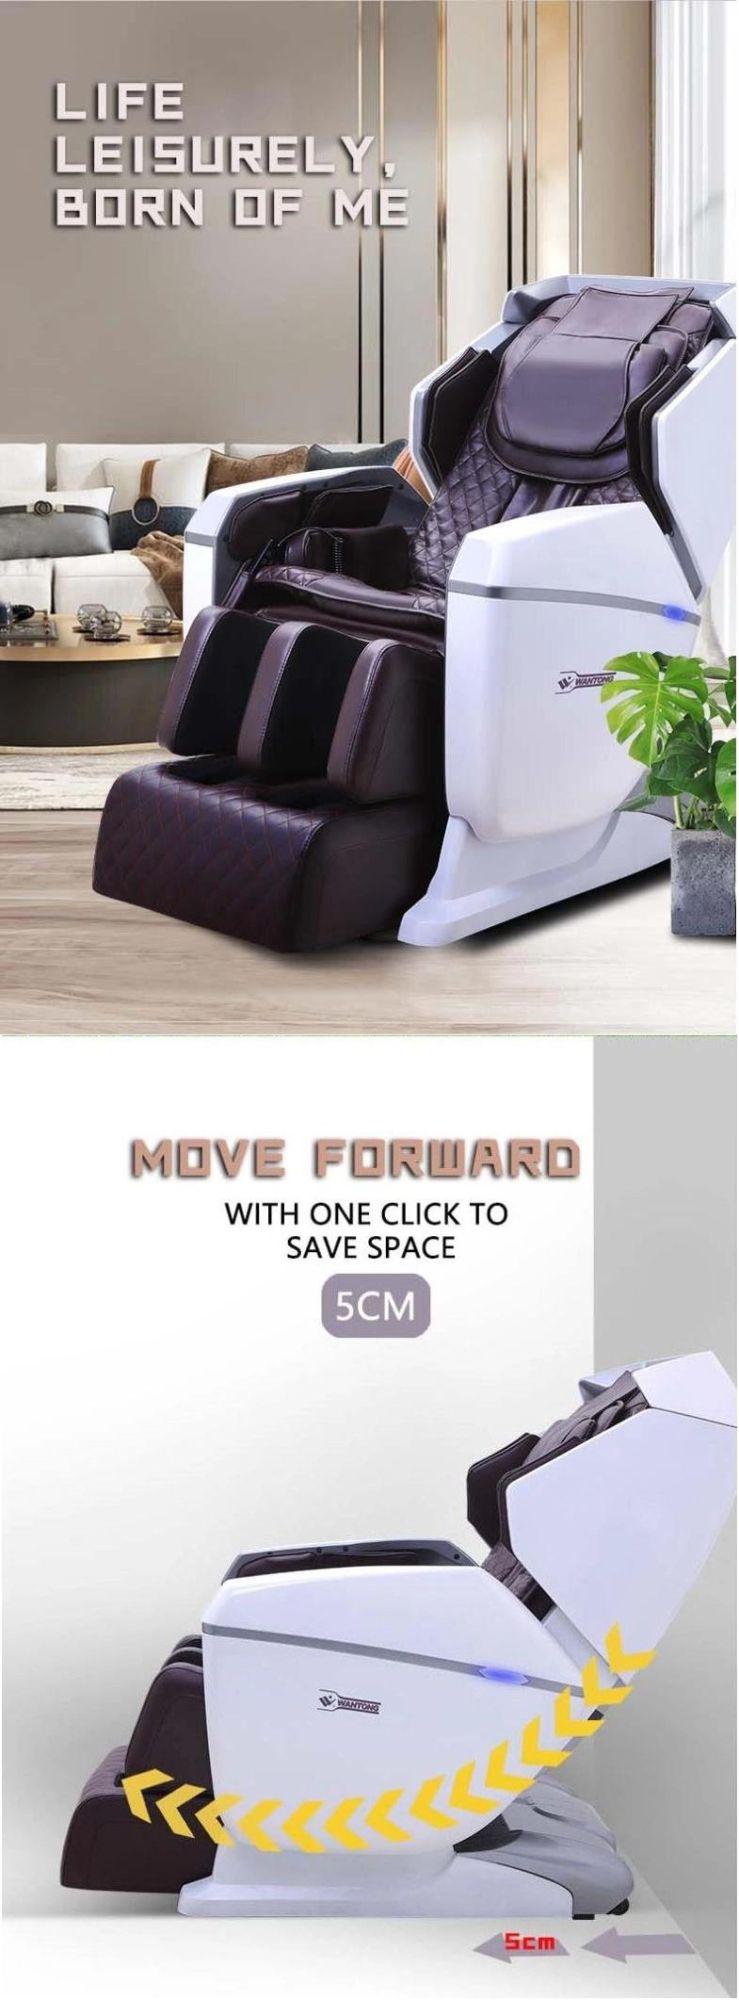 Multifunctional Vibration Comfortable Whole Body Massage Chair for Sale